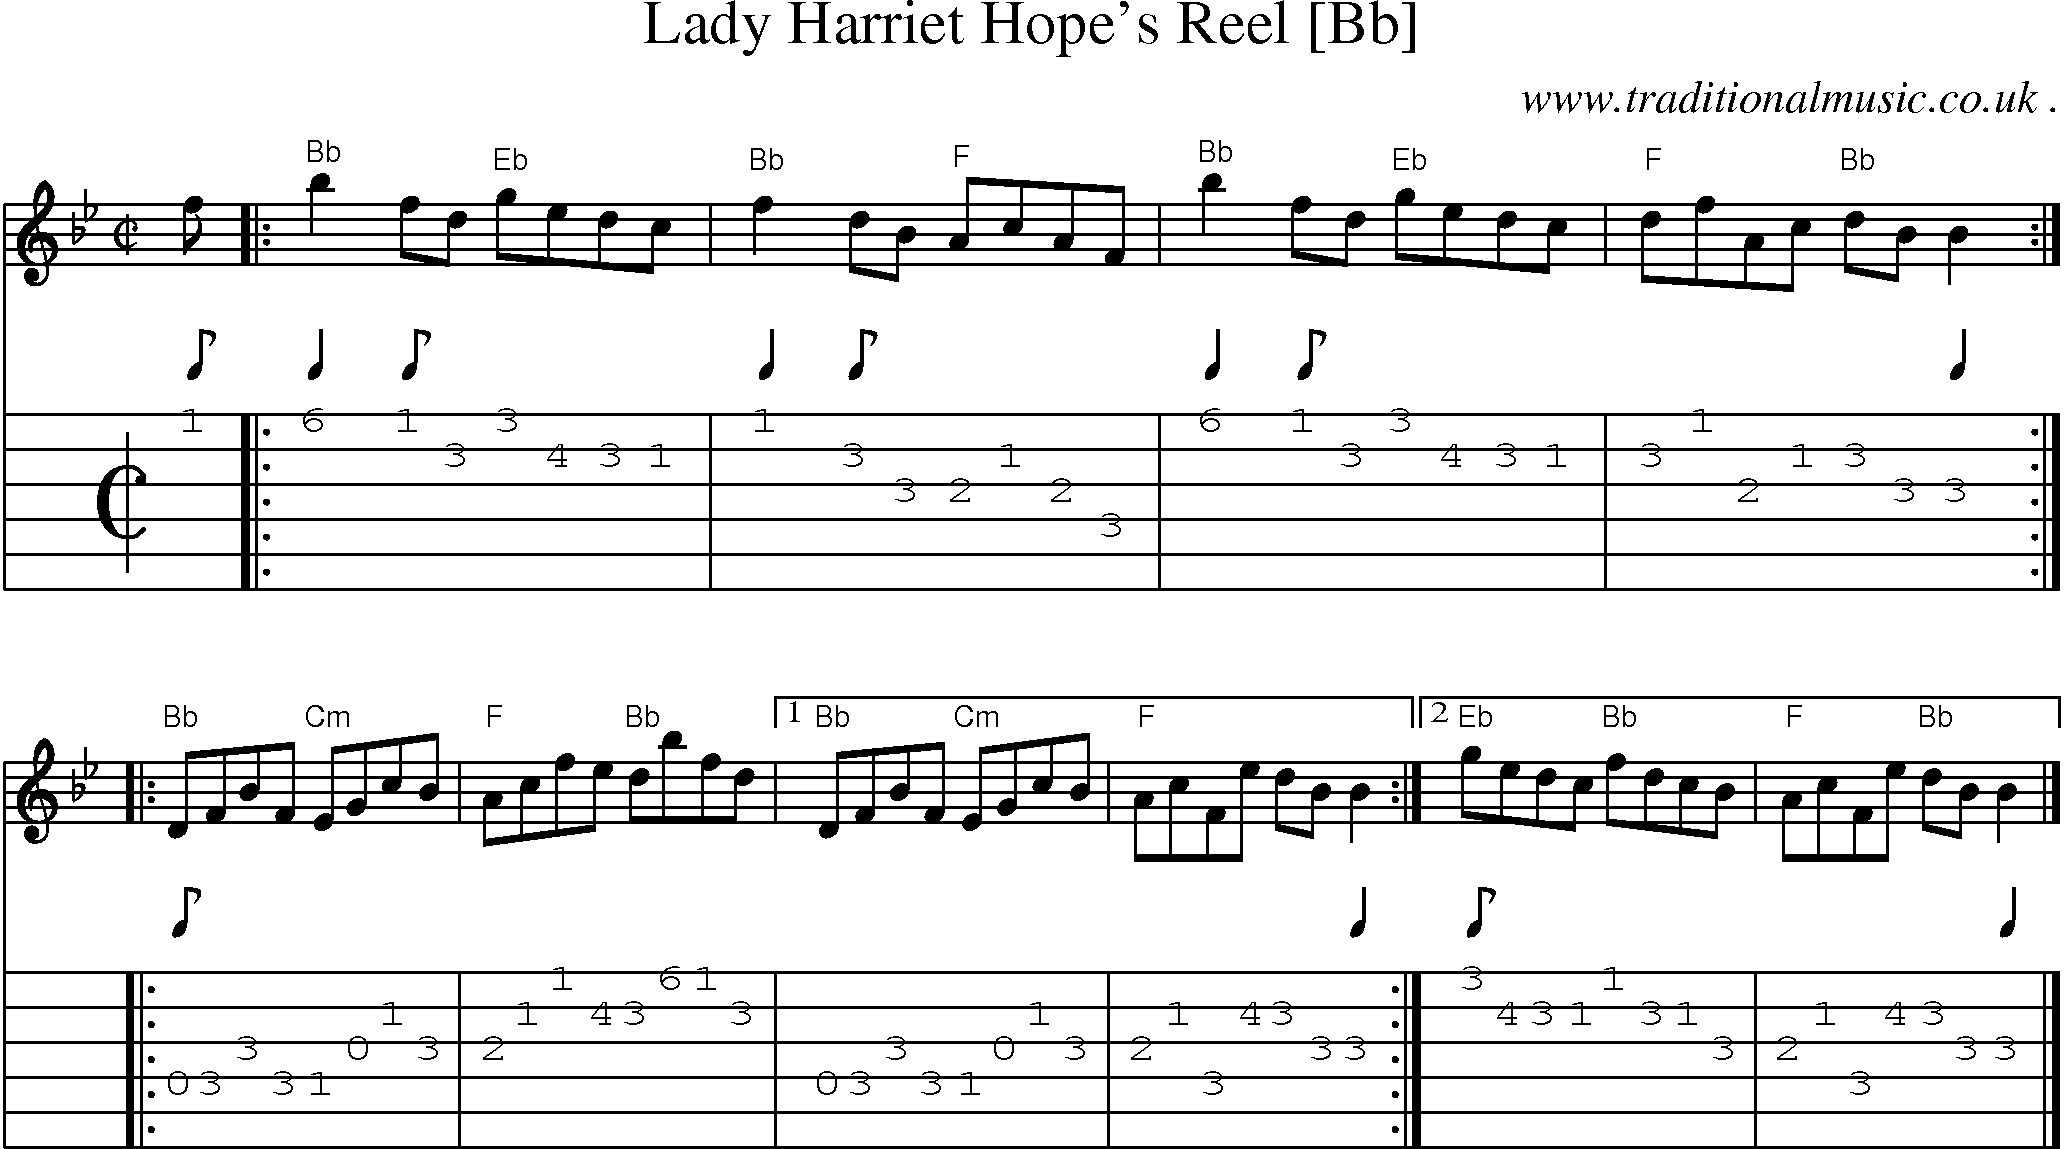 Sheet-music  score, Chords and Guitar Tabs for Lady Harriet Hopes Reel [bb]